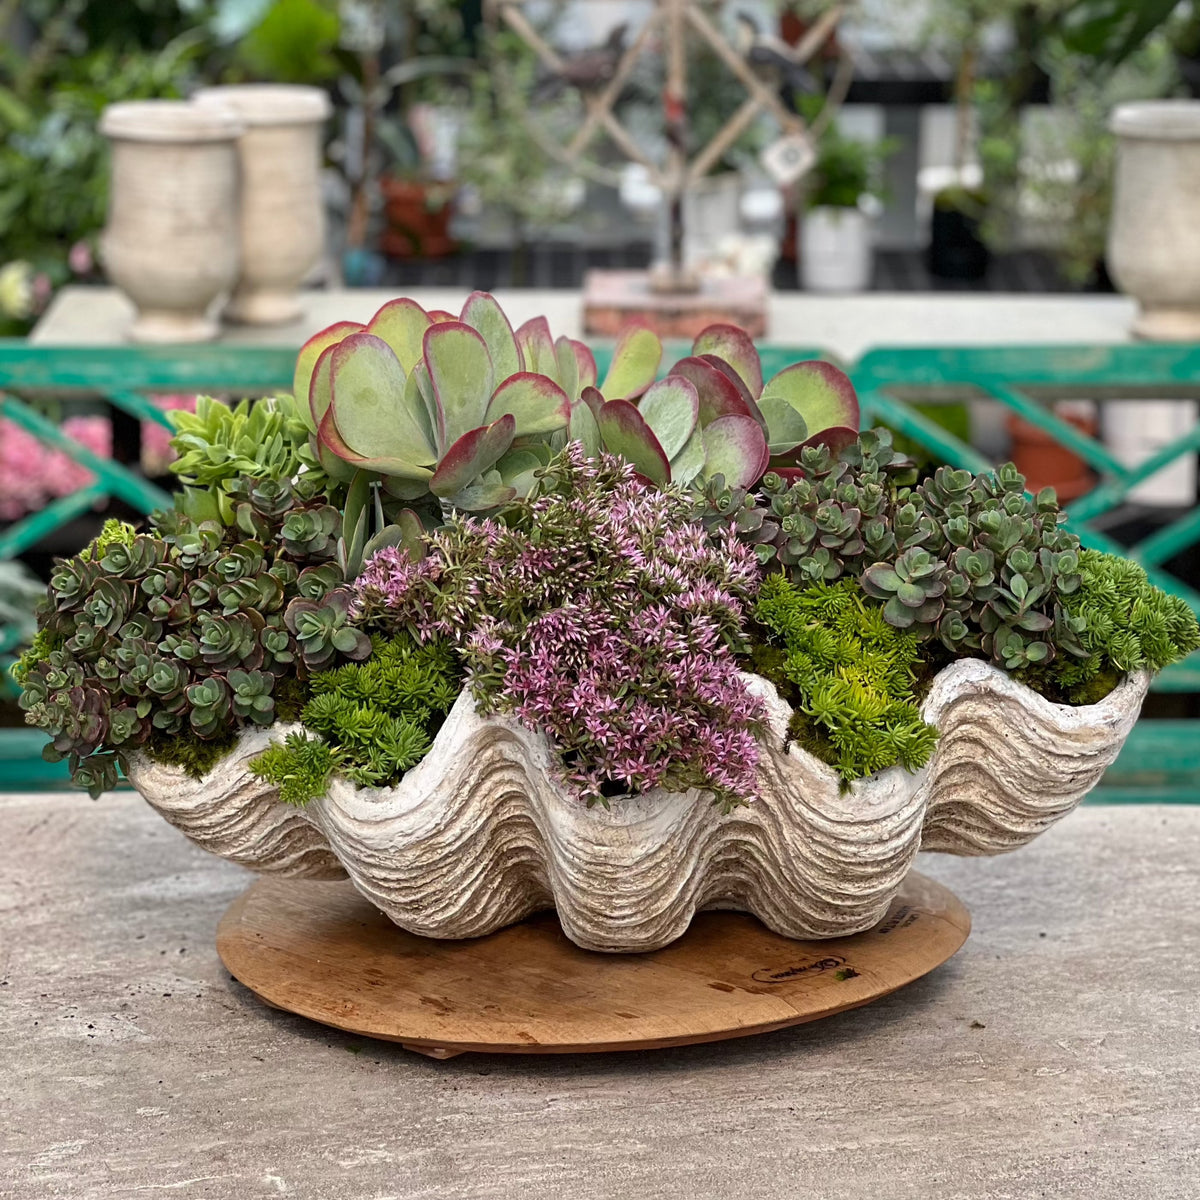 Clam Shell Indoor Outdoor Decor / Planter - Large